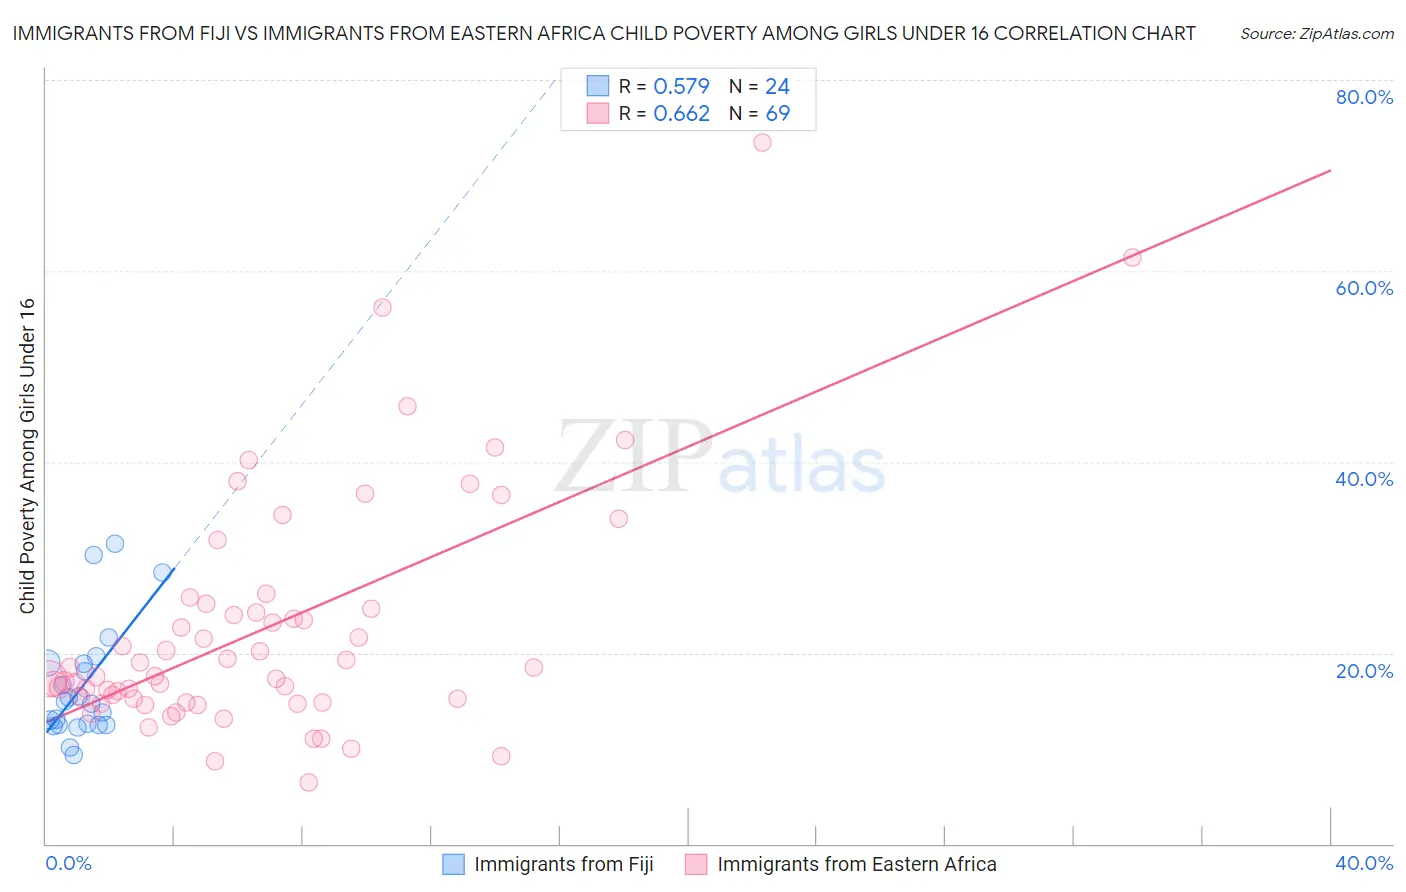 Immigrants from Fiji vs Immigrants from Eastern Africa Child Poverty Among Girls Under 16